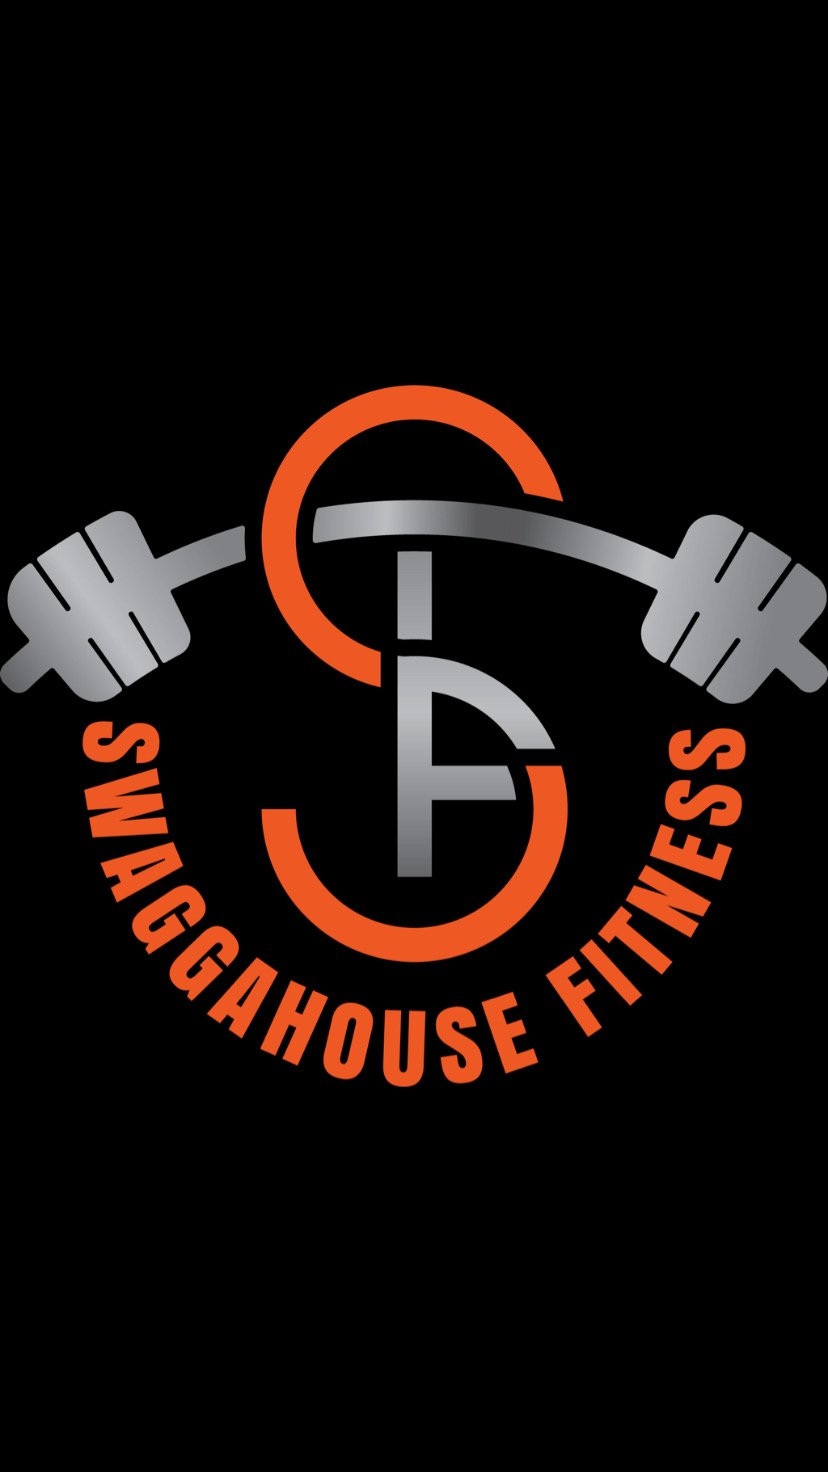 Swaggahouse fitness